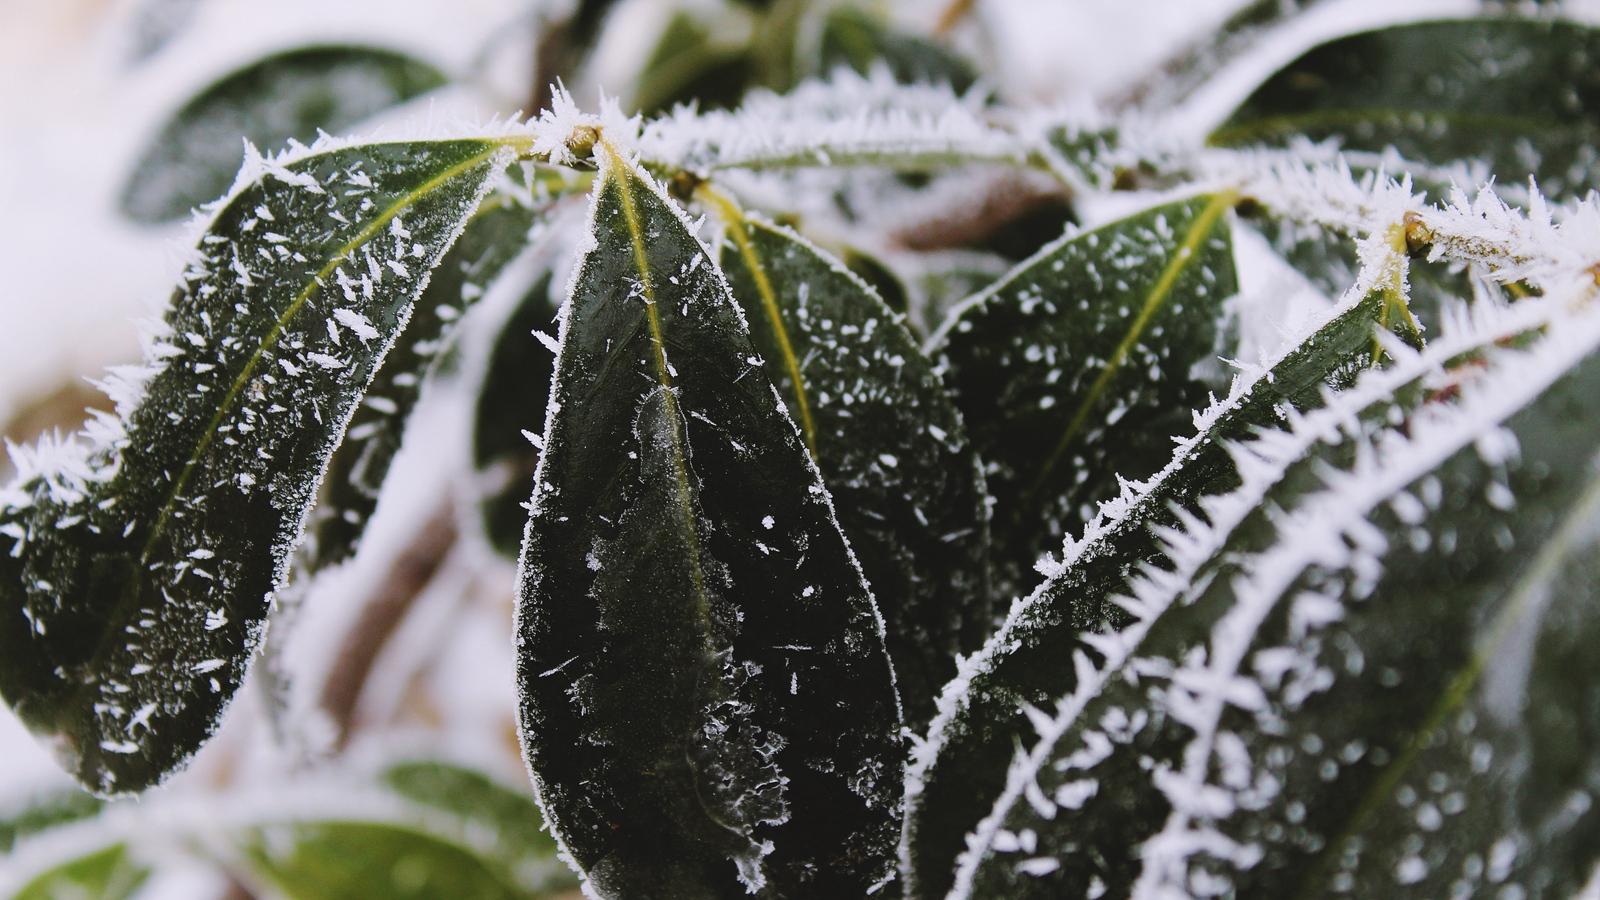 Download wallpaper 1600x900 leaves, frost, snow widescreen